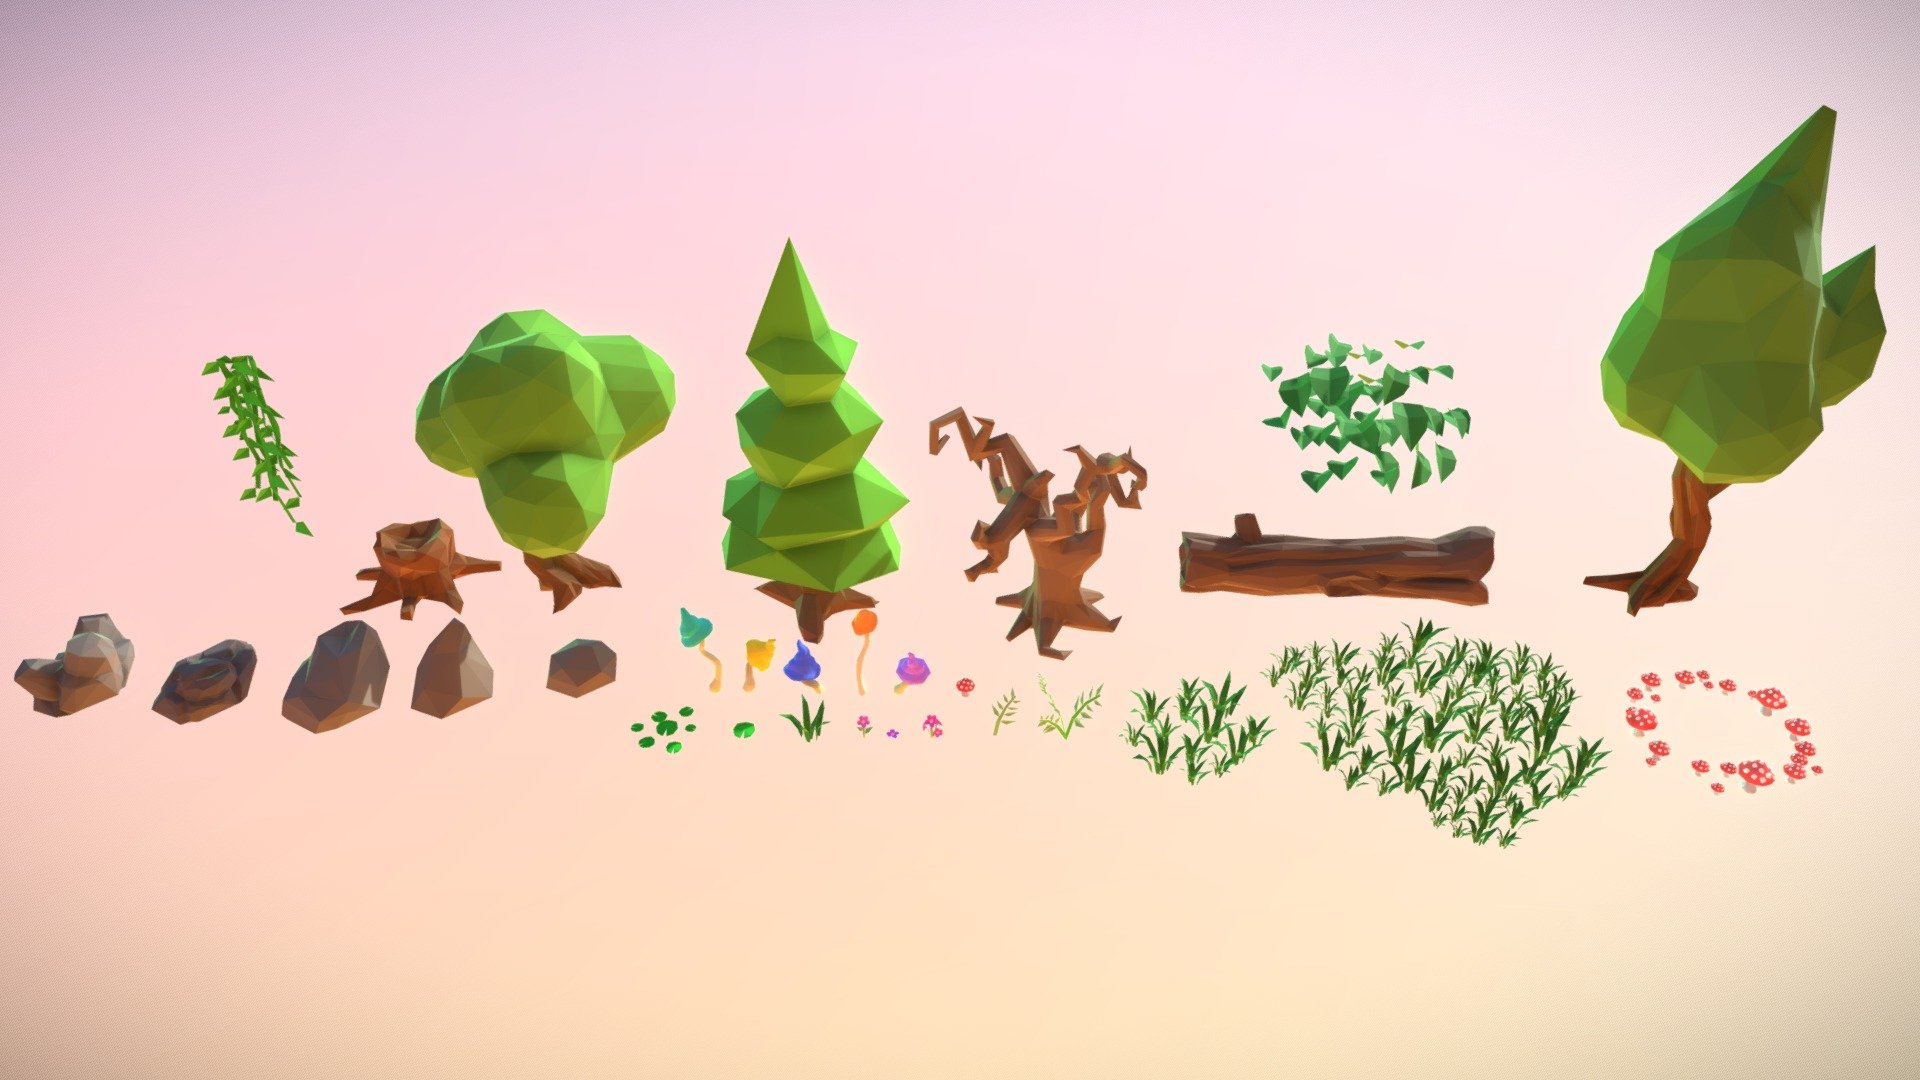 Here's a bunch of trees and rocks and such for all of your woodsy, outdoor adventuring needs! Low poly, stylized and game ready! - Low Poly Nature Set - Buy Royalty Free 3D model by astarael (@astarael.games) 3d model